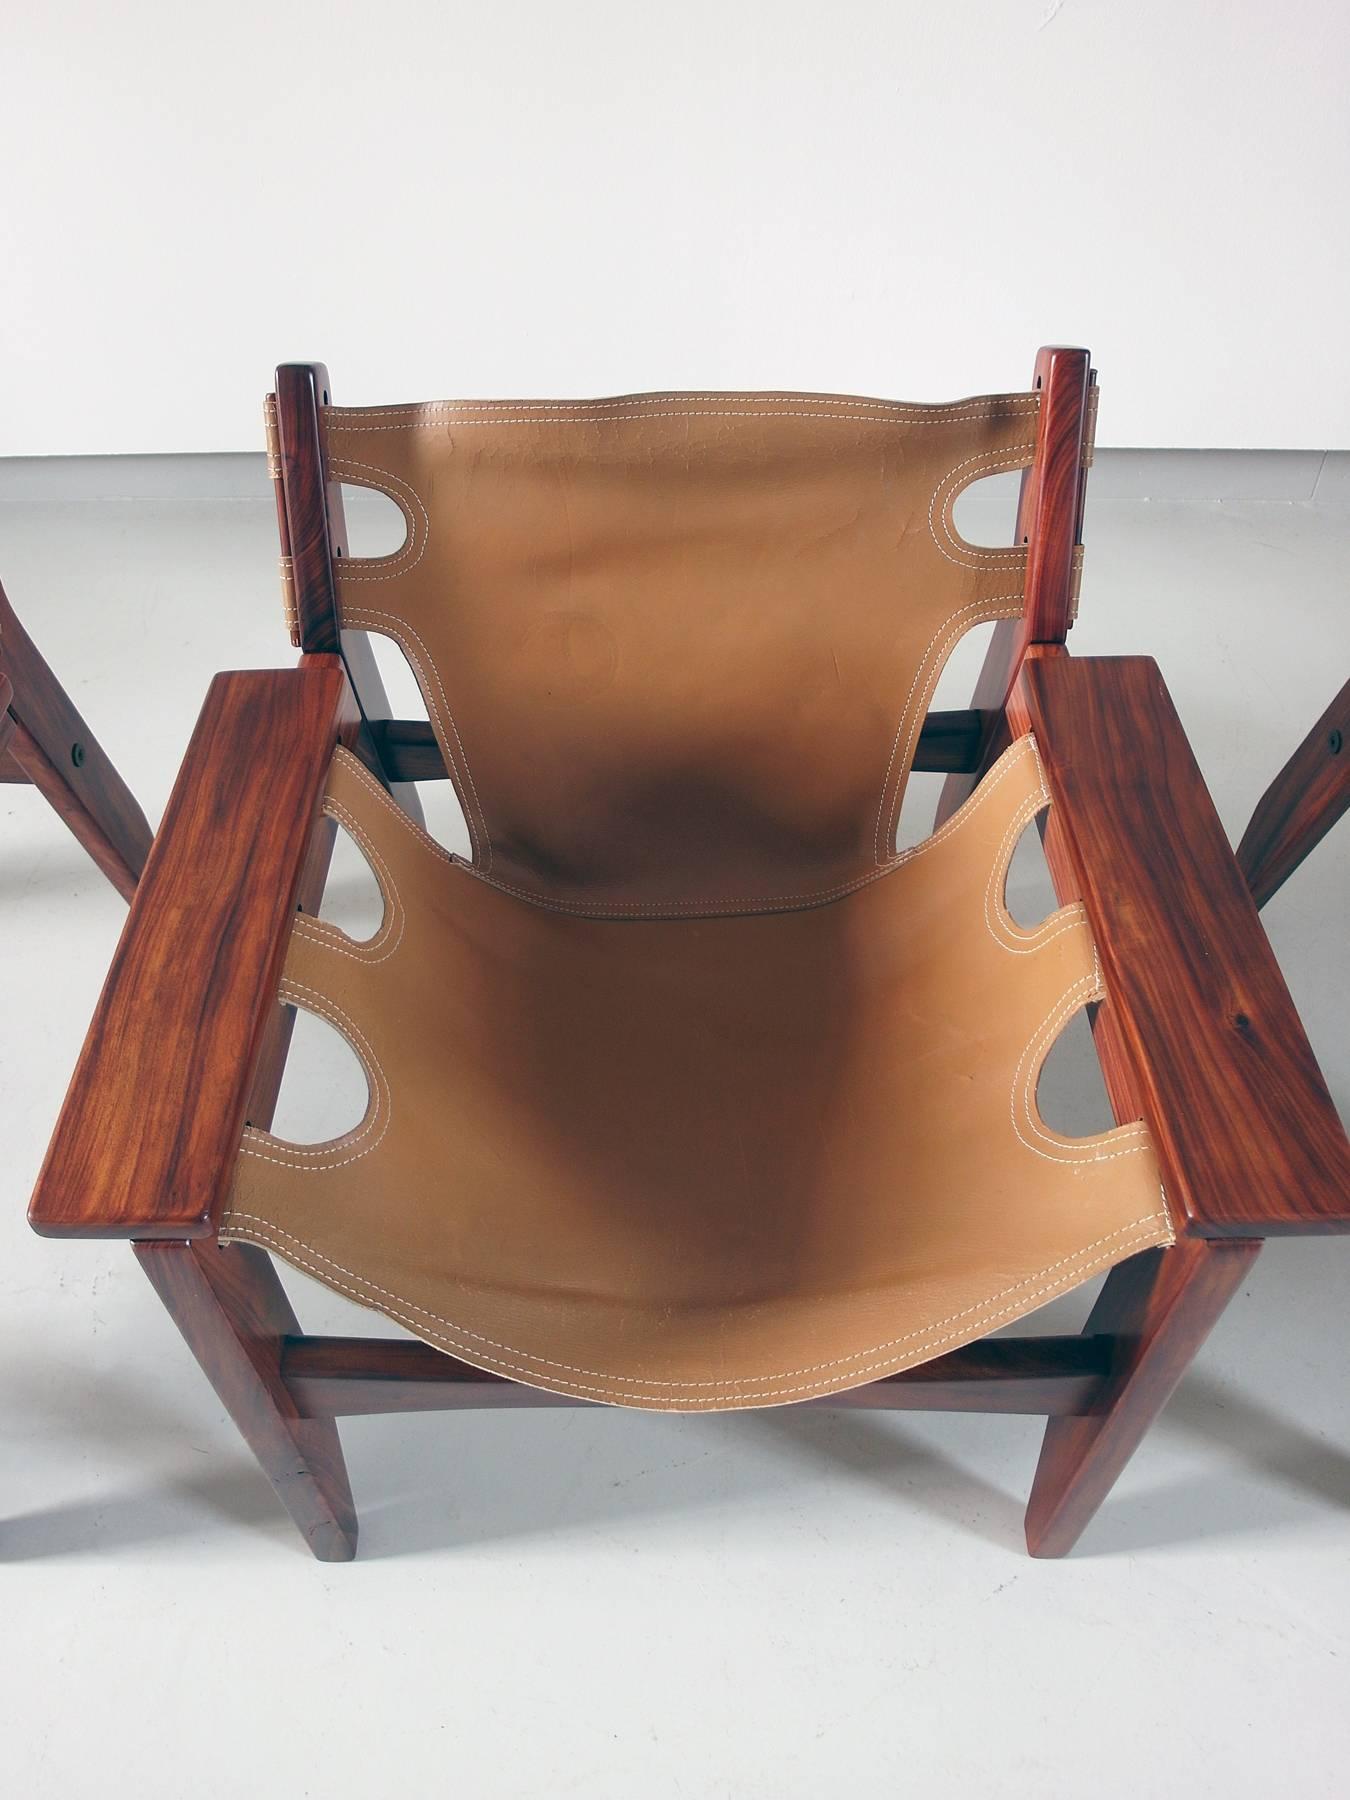 Leather A pair of Sergio Rodrigues Kilin Lounge Chairs for Oca, Brazil, 1973